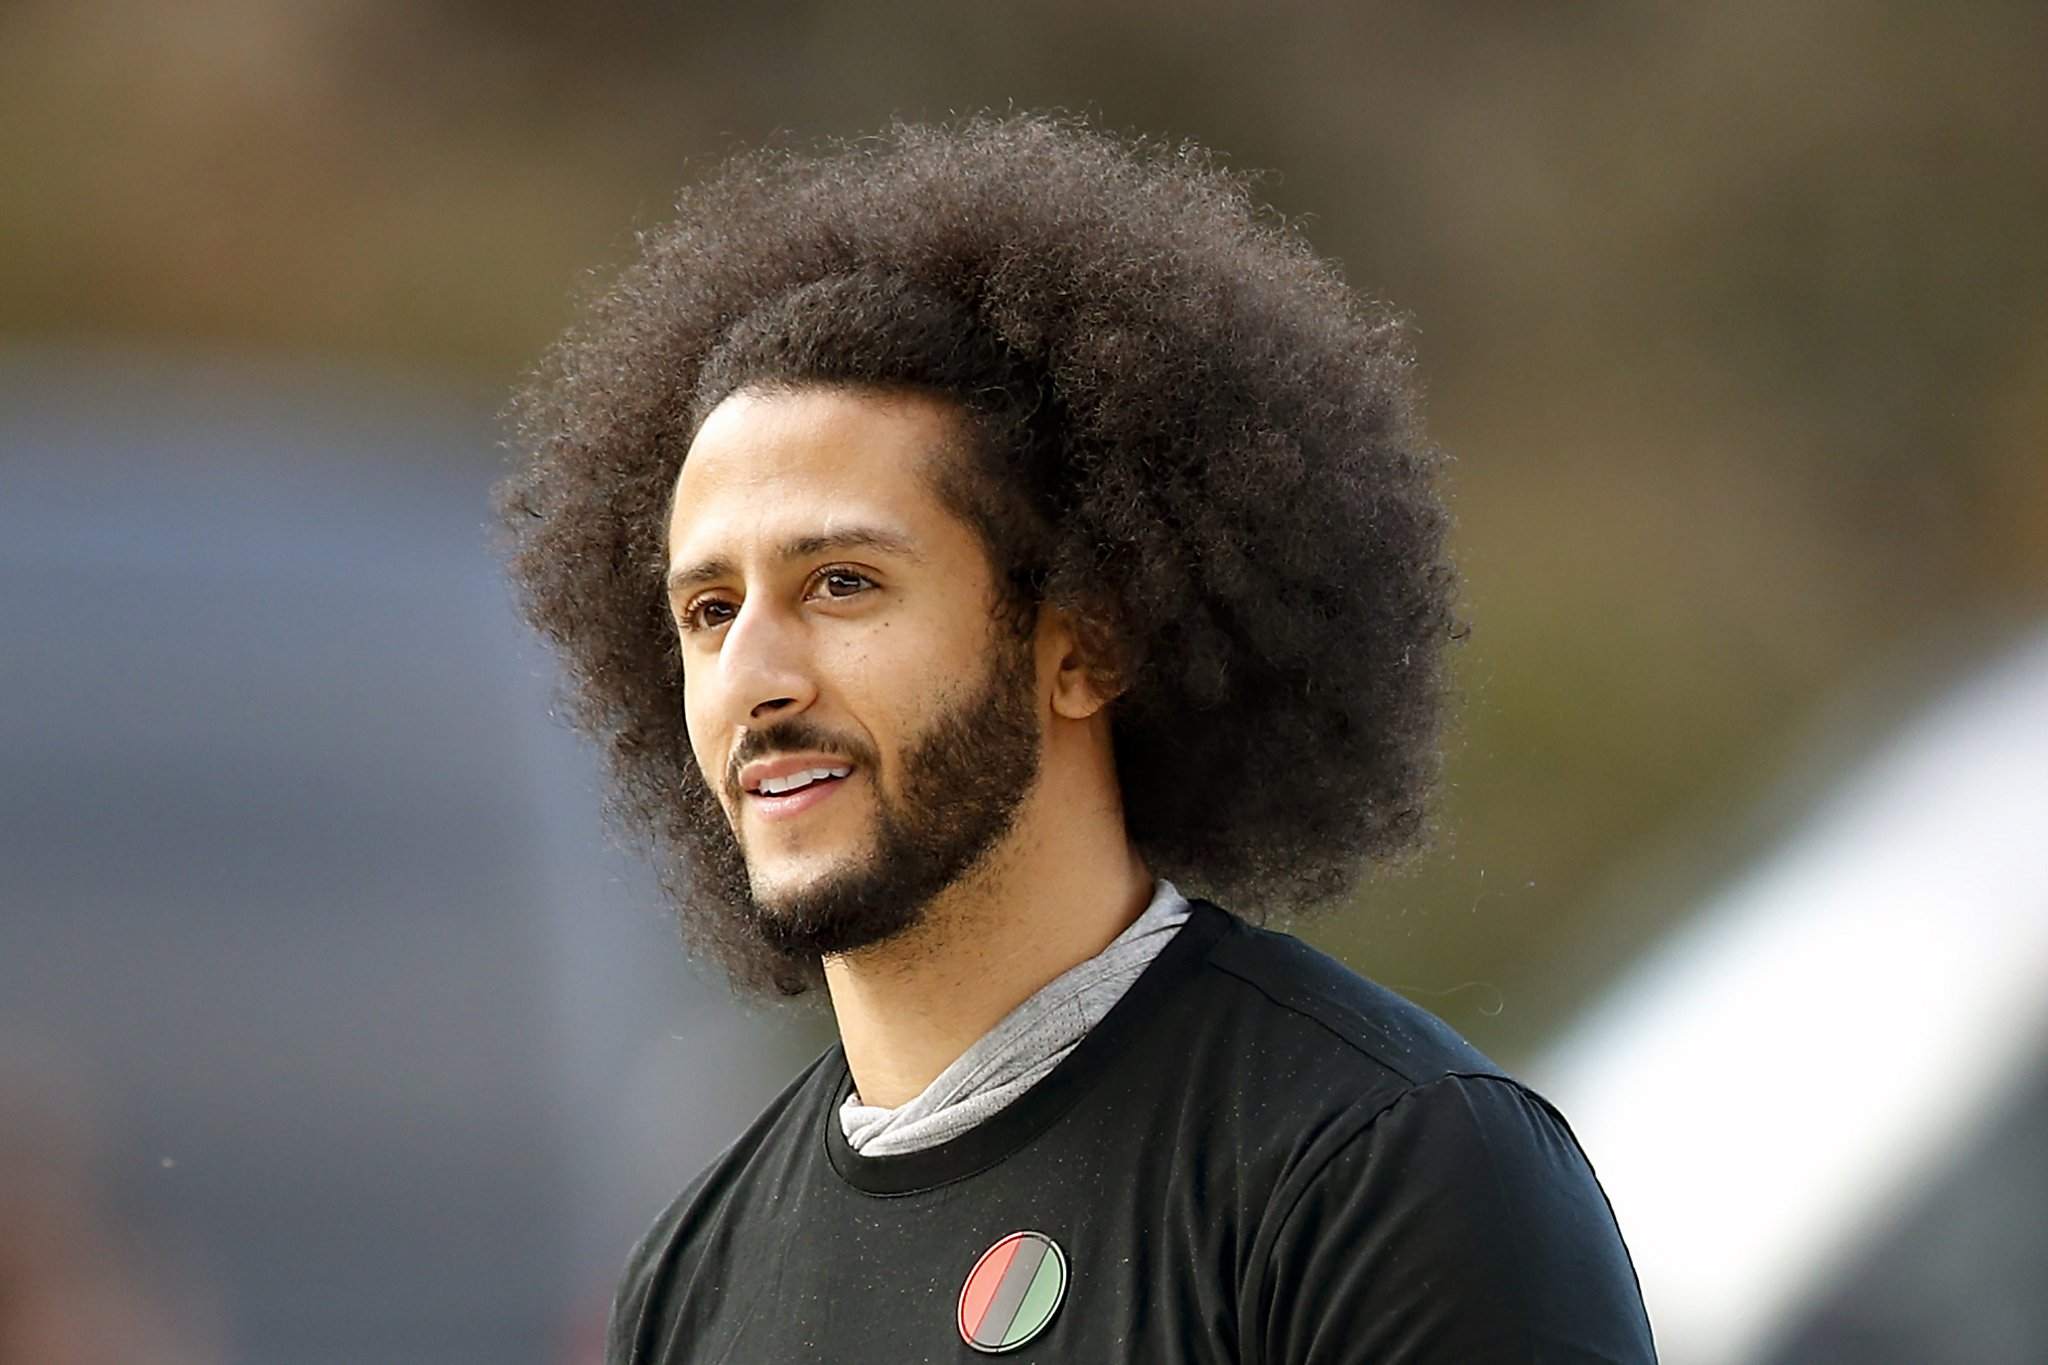 Colin Kaepernick's 49ers rookie jersey sells for record price at auction